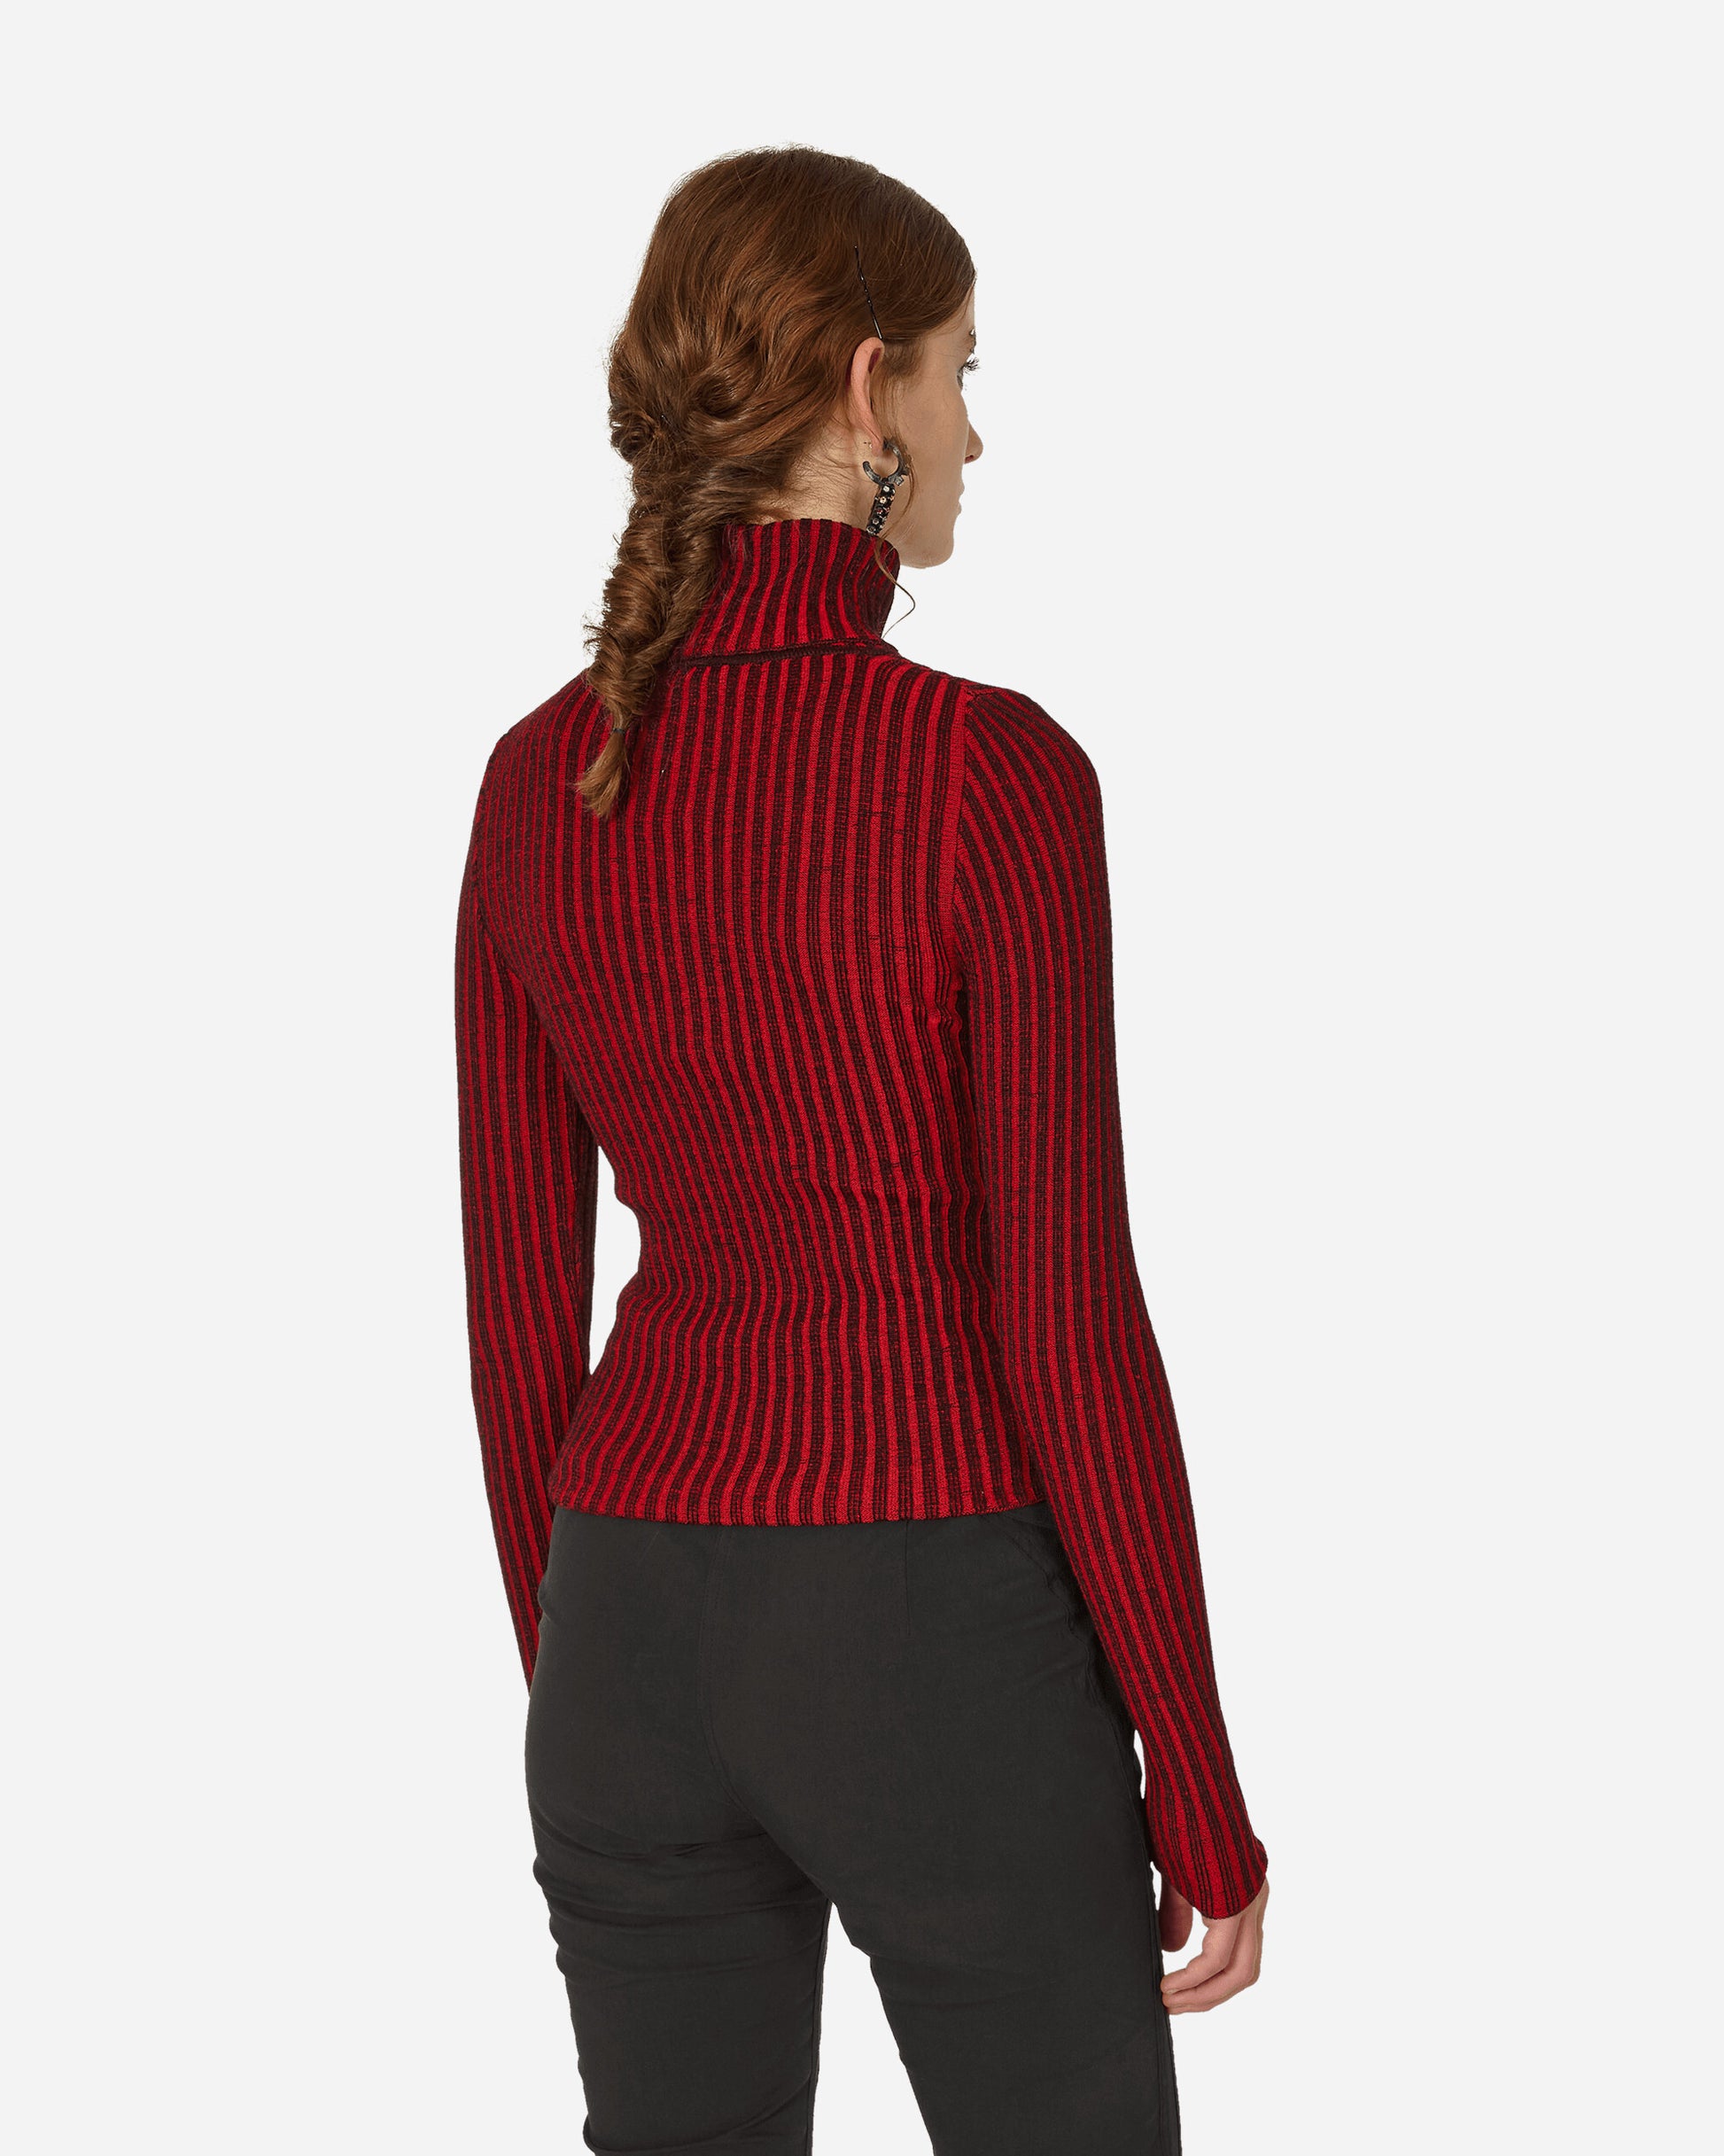 Chet Lo Wmns Smiley Collab Turtleneck Black/Red Knitwears Turtleneck FW23CL16 1